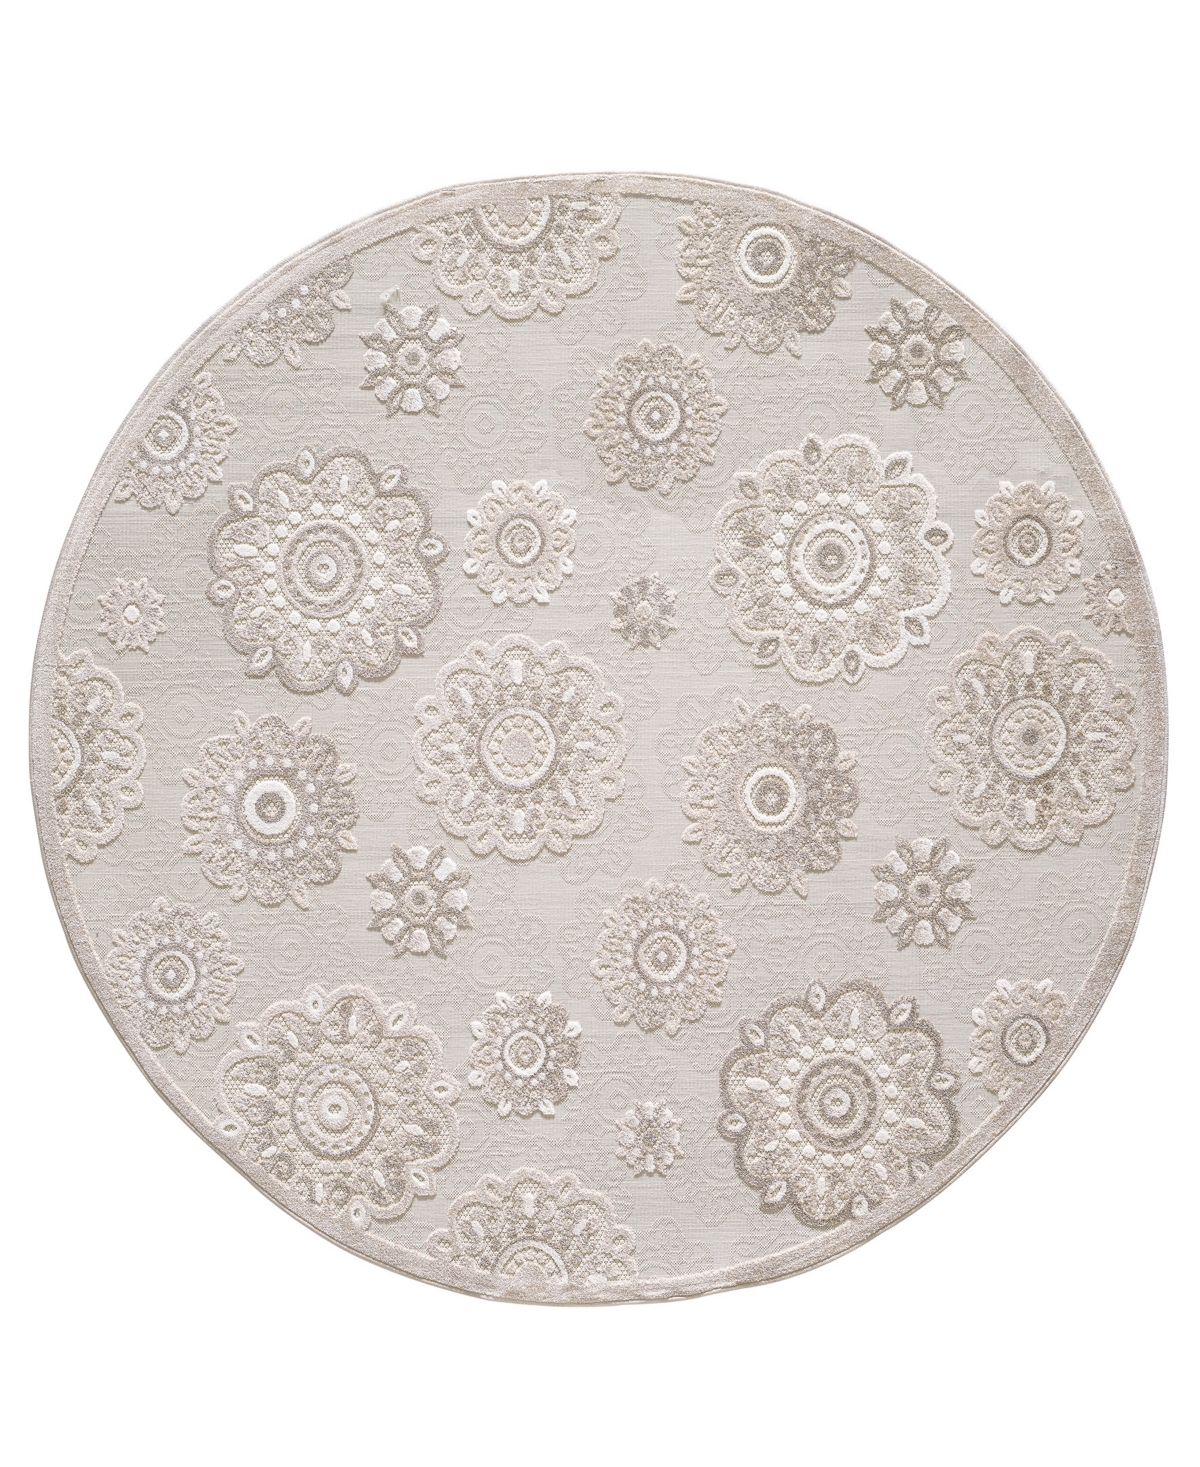 Kas Calla 6933 7'10in x 7'10in Round Area Rug - Taupe